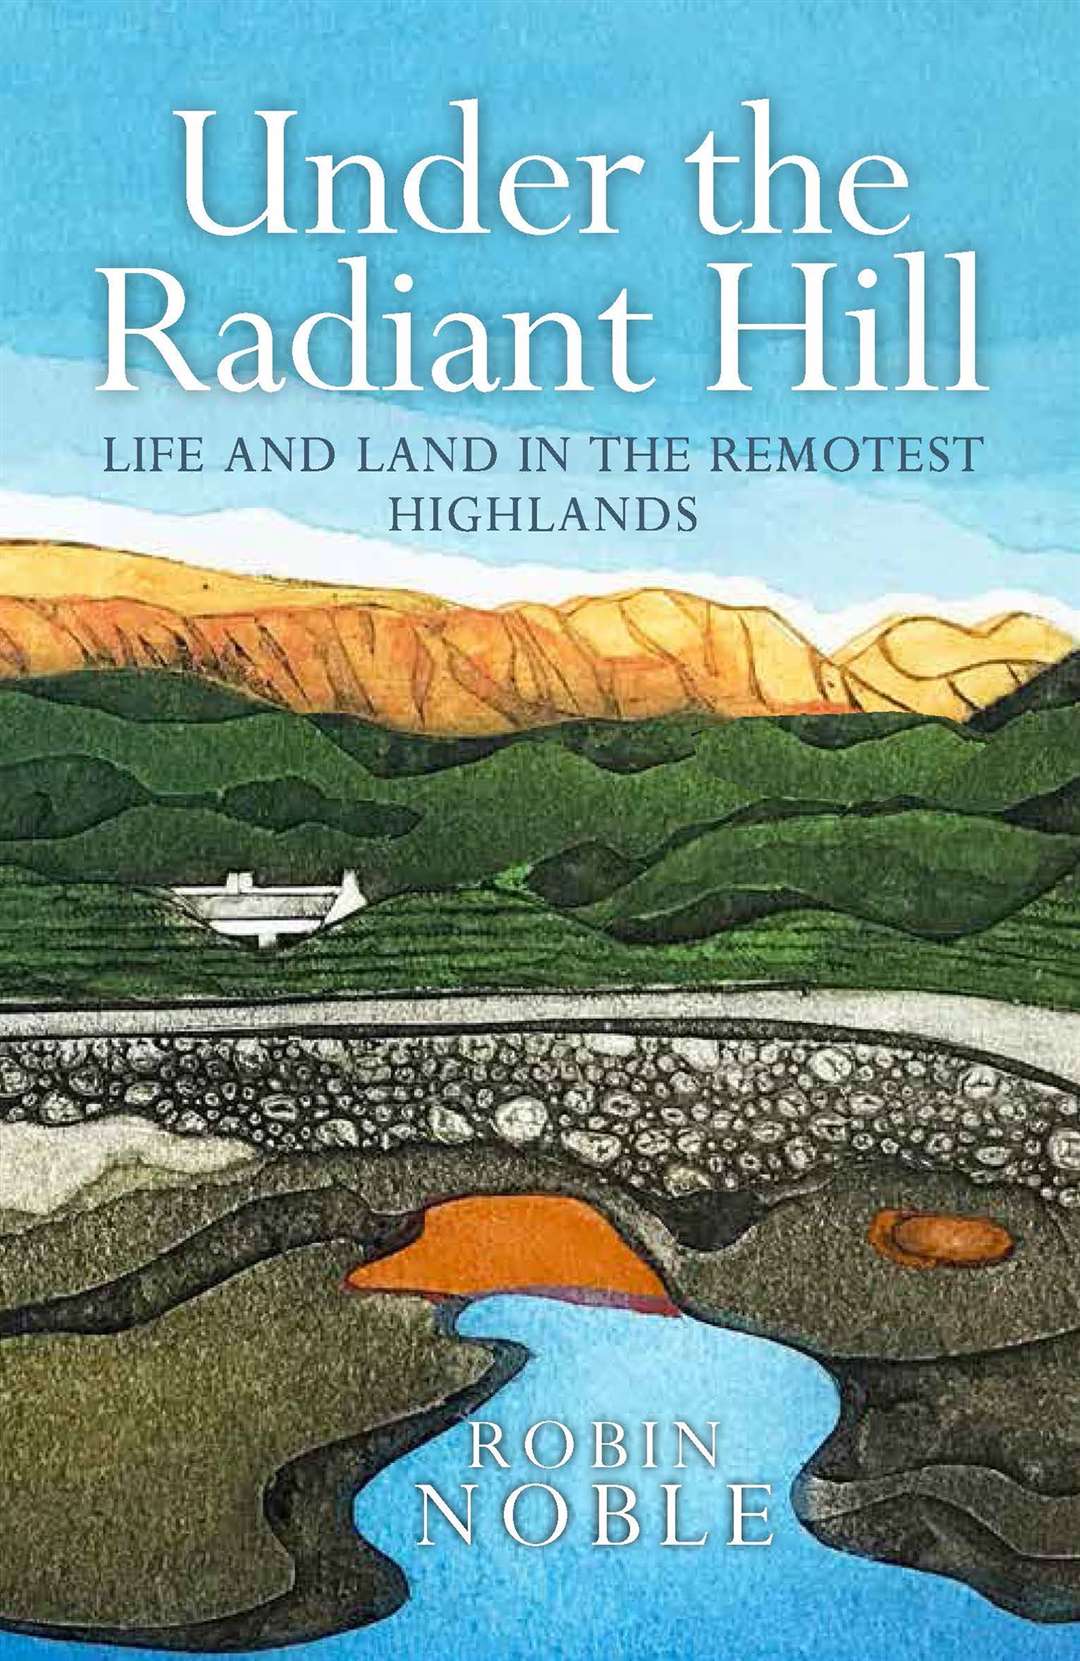 Under The Radiant Hill by Robin Noble.